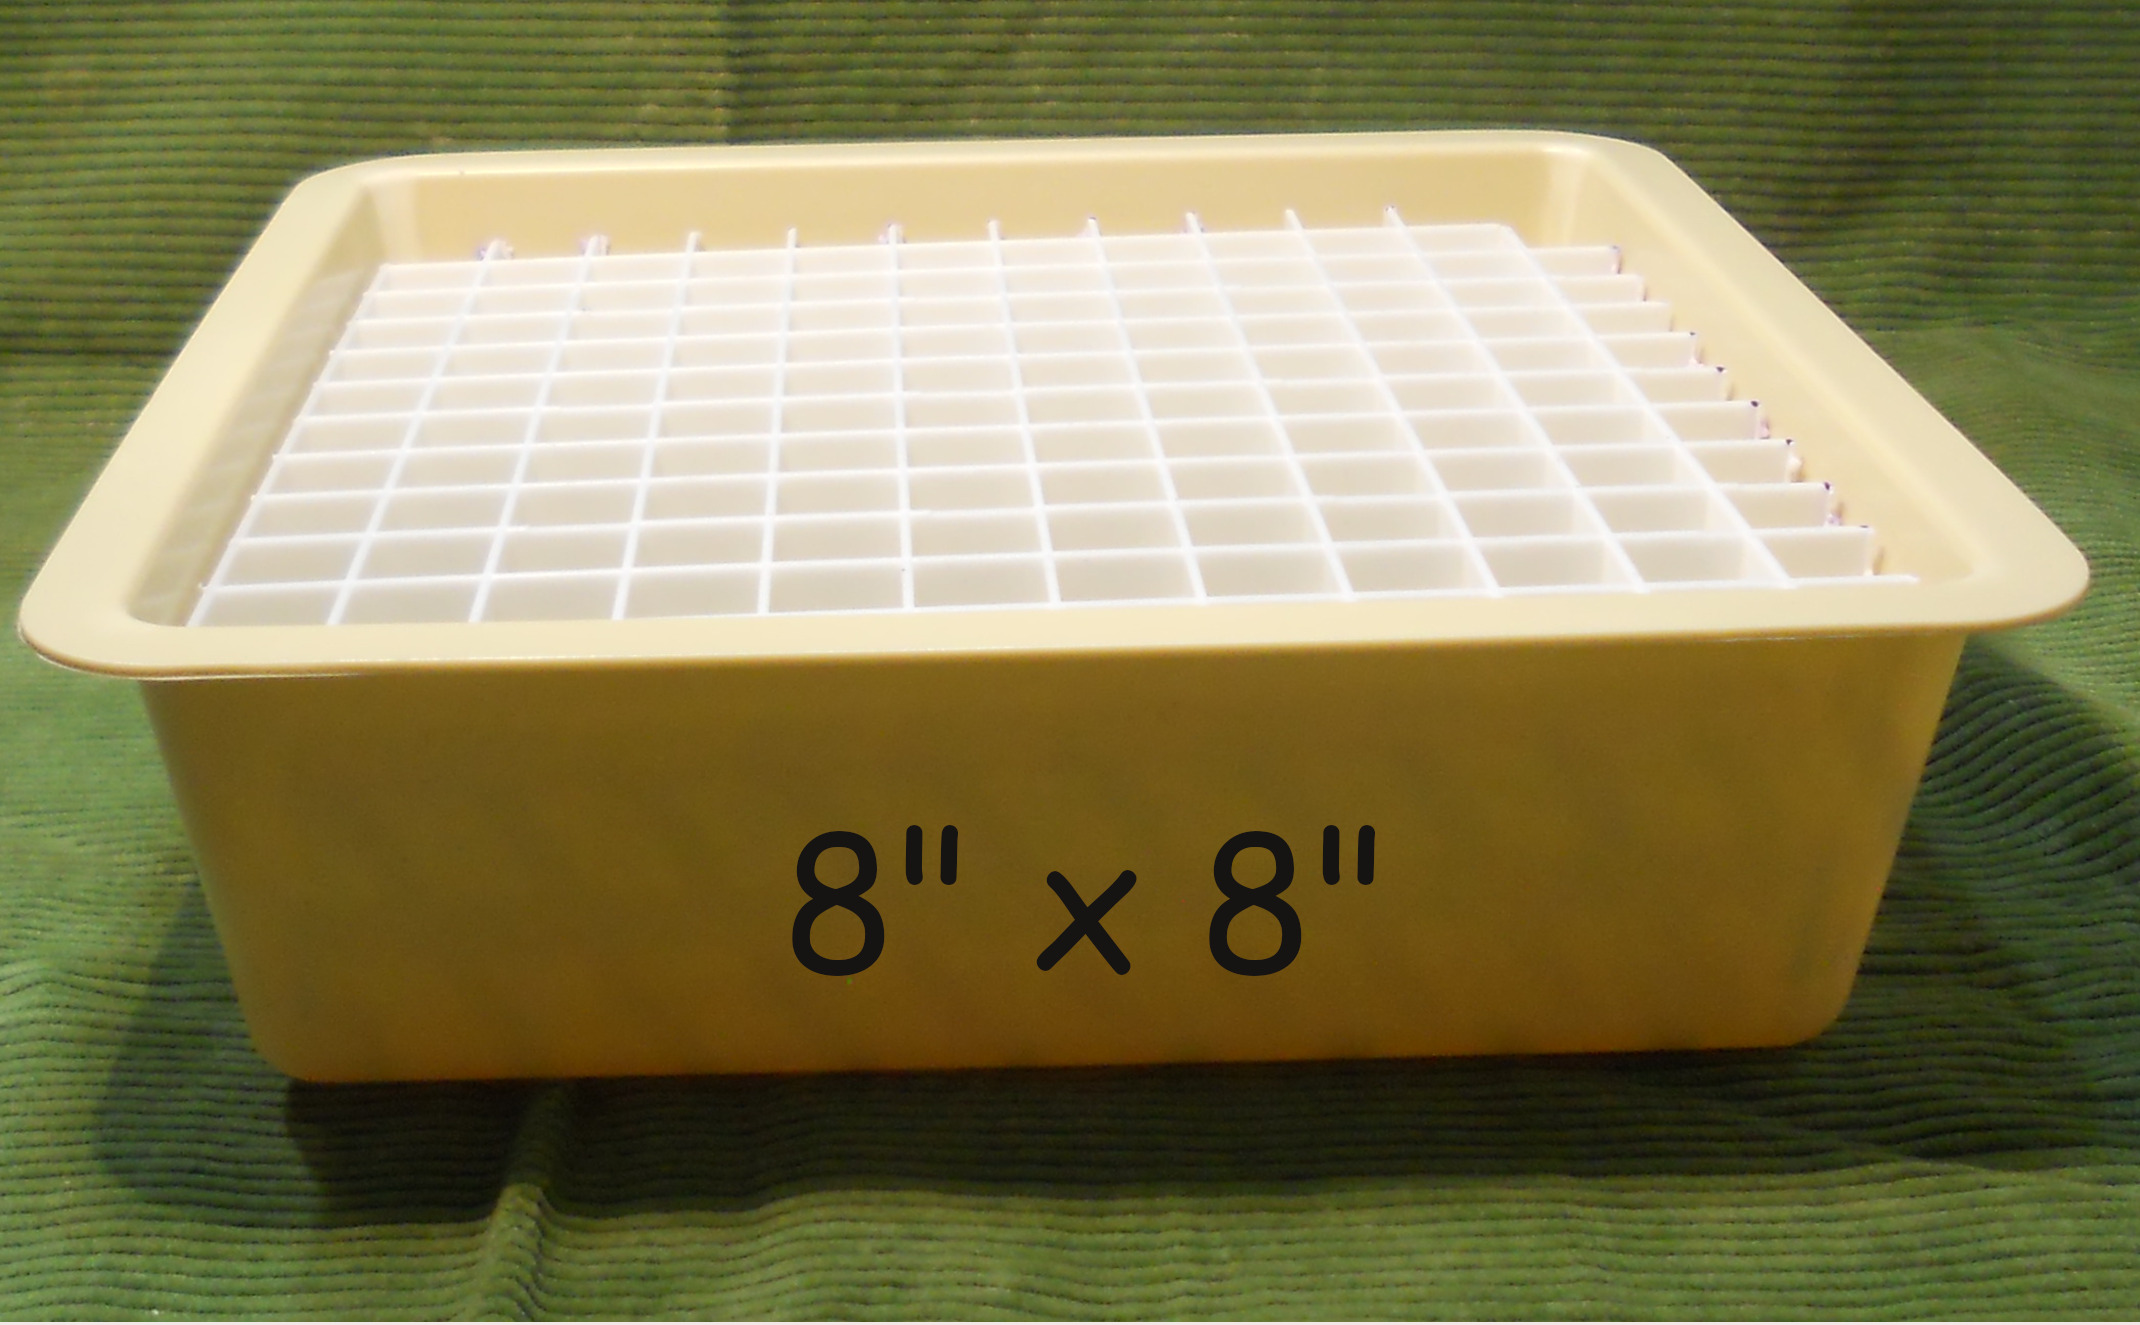 8 x 8" tray + grid side view